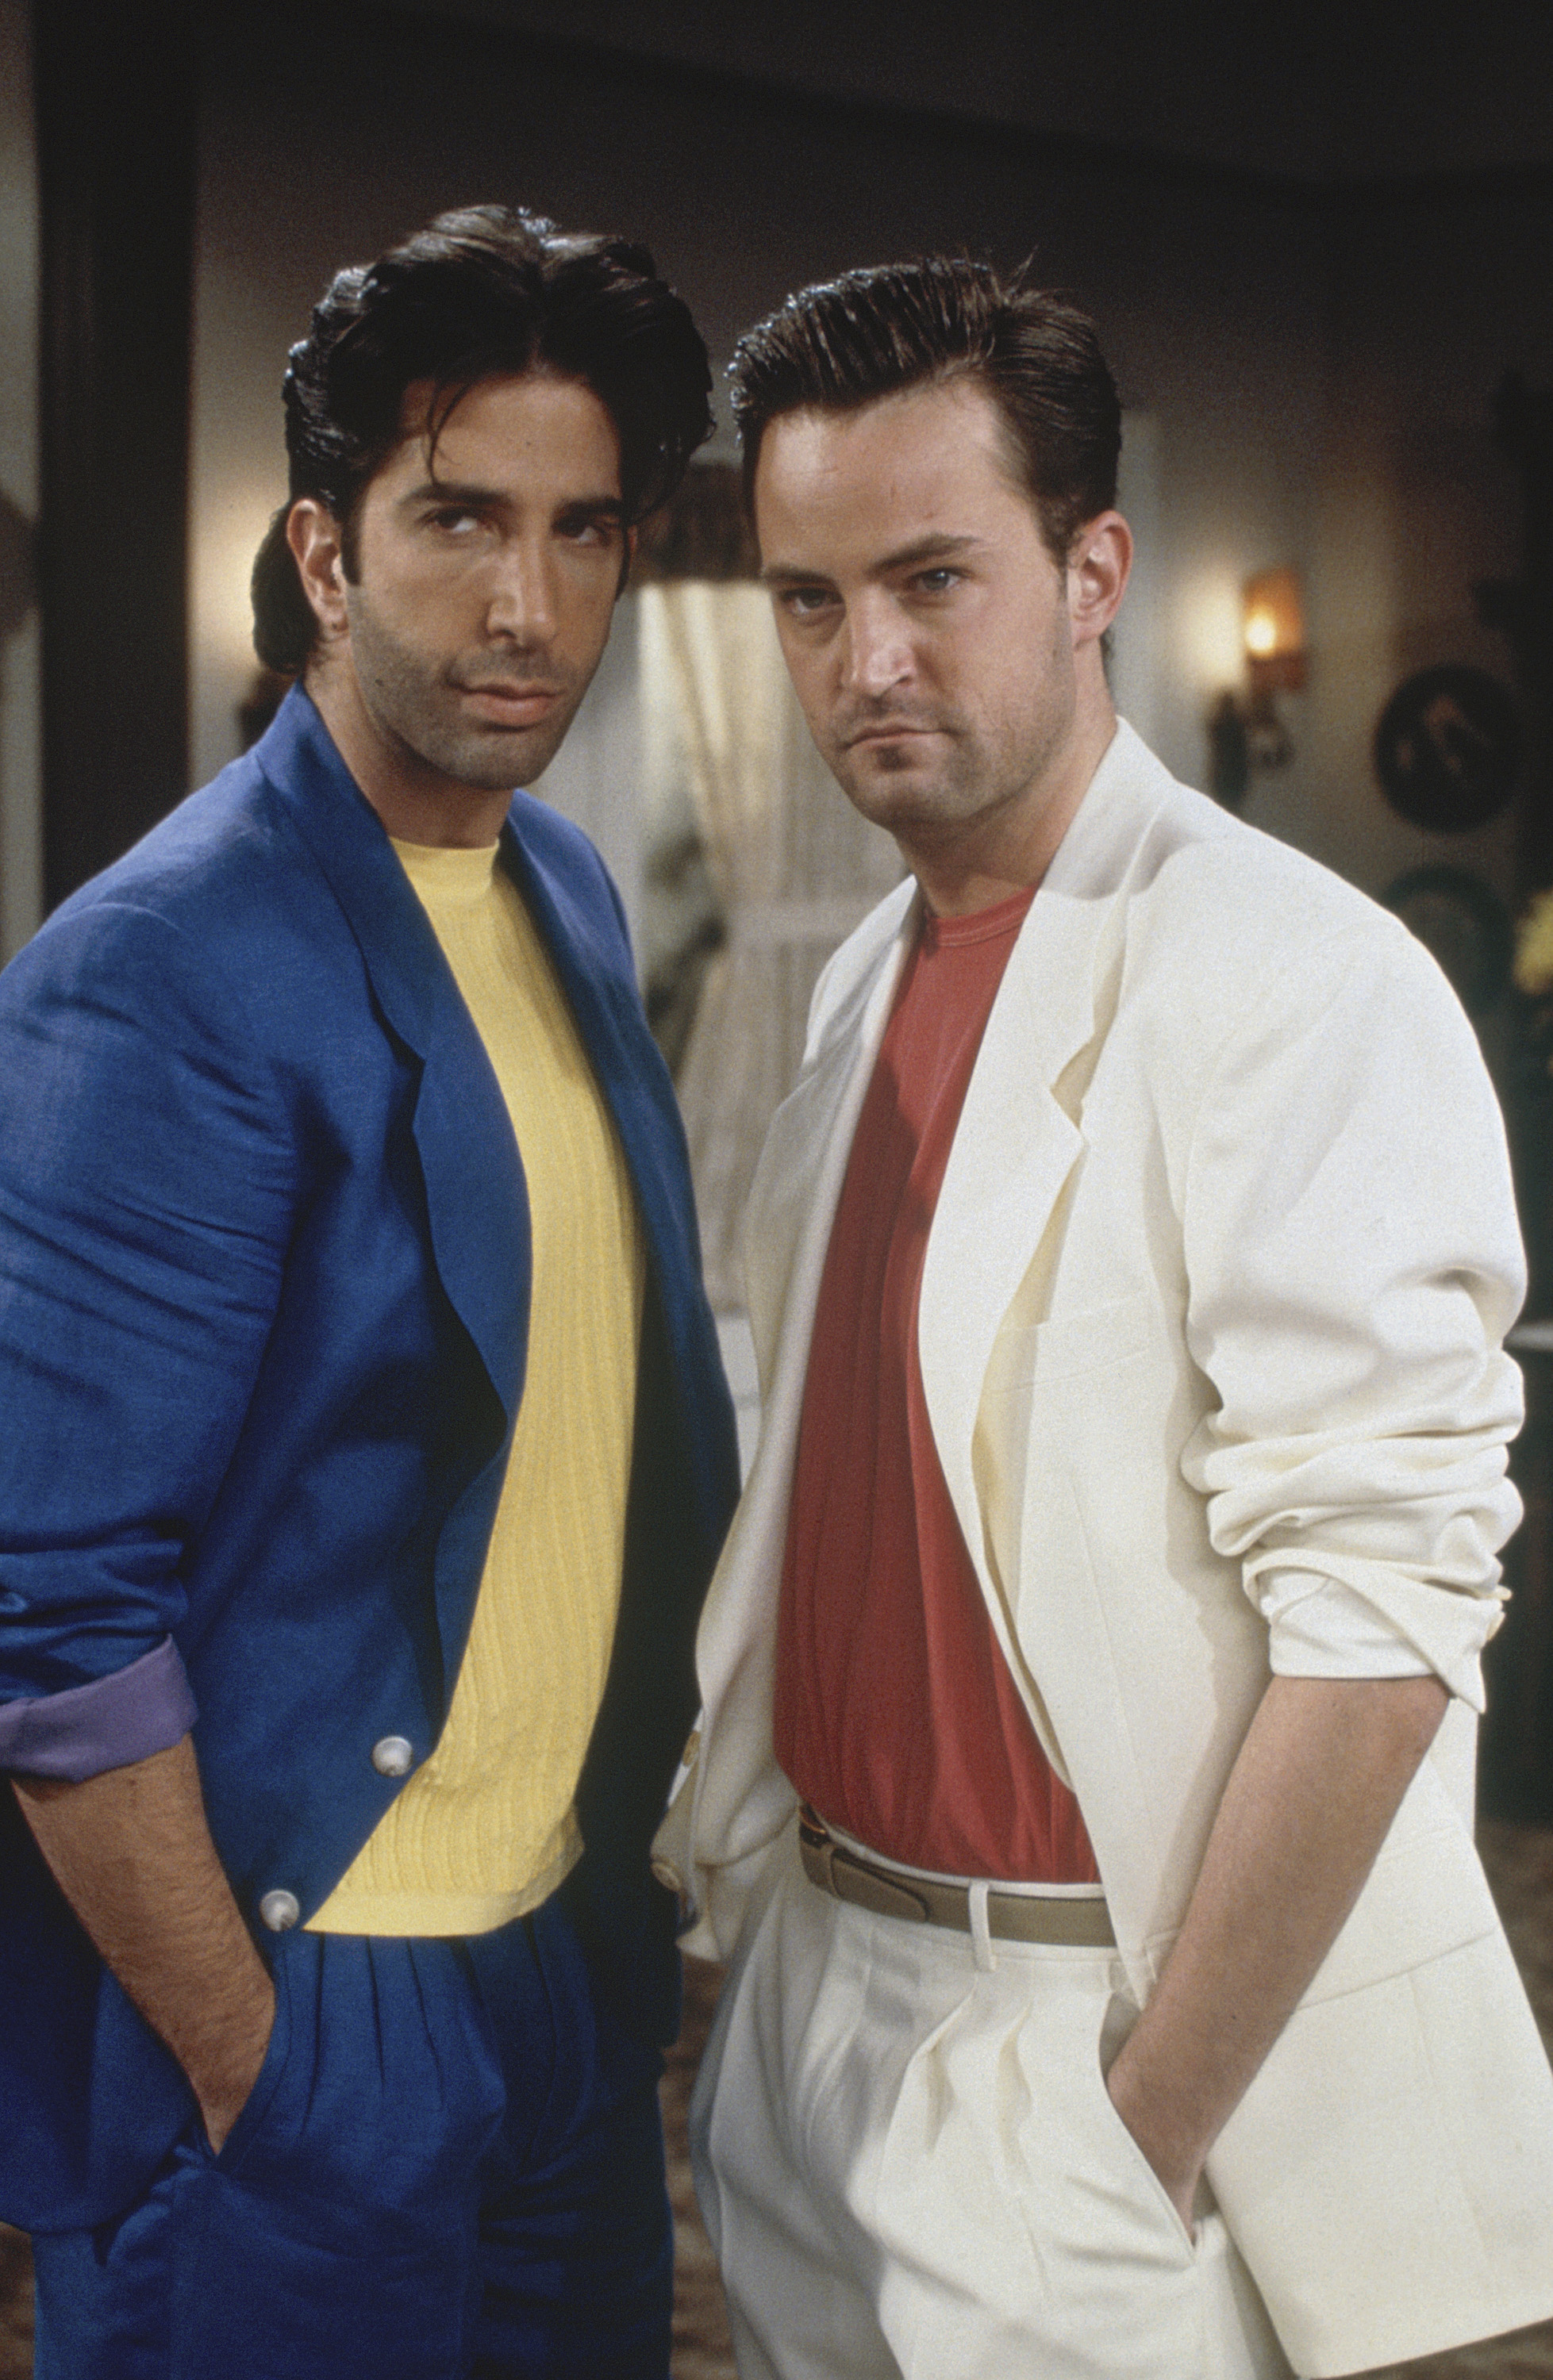 Closeup of David Schwimmer and Matthew Perry